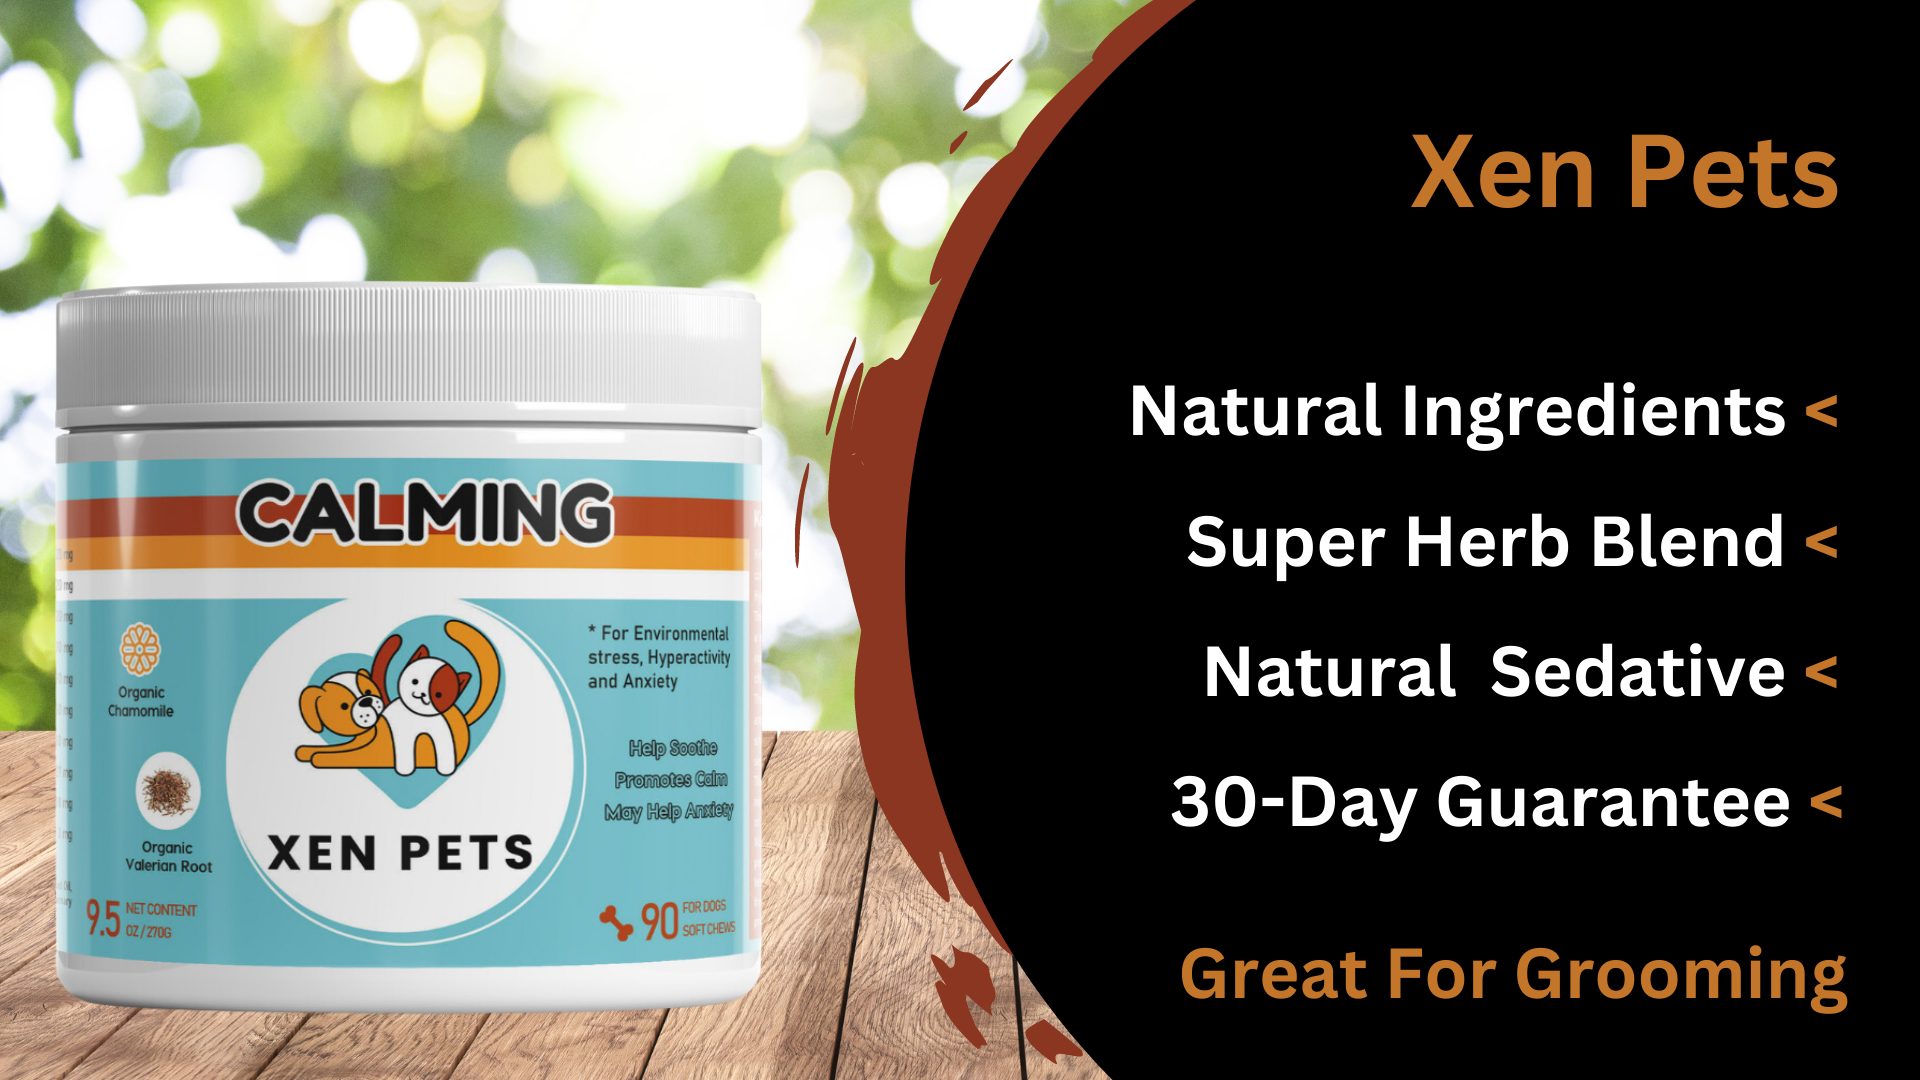 Xen Pets natural sedative for grooming